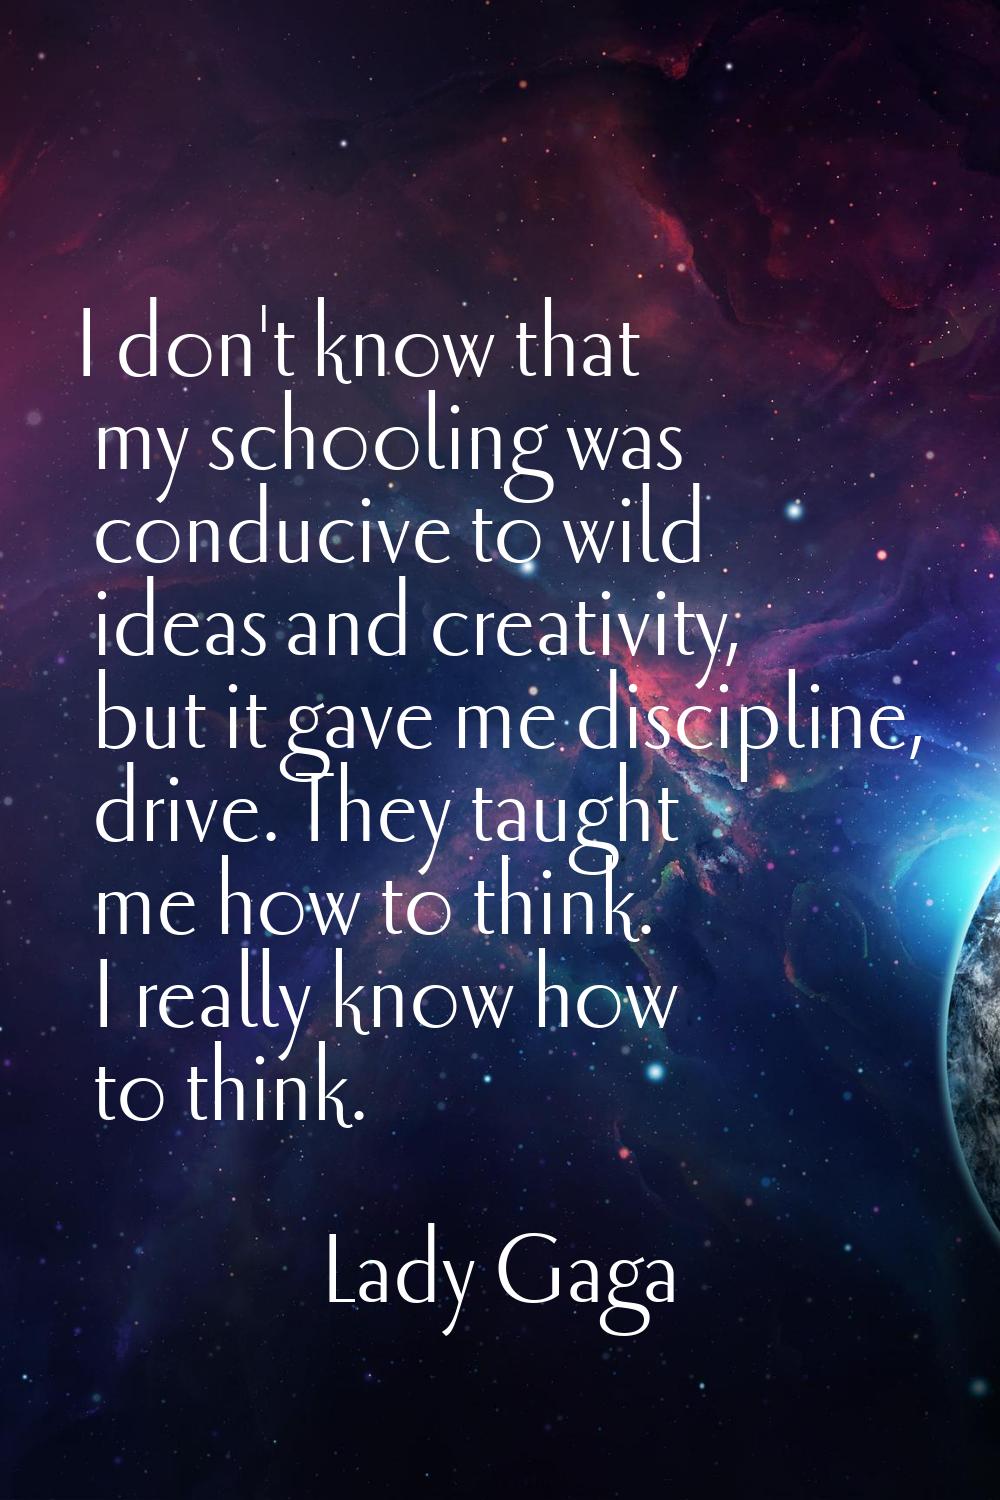 I don't know that my schooling was conducive to wild ideas and creativity, but it gave me disciplin